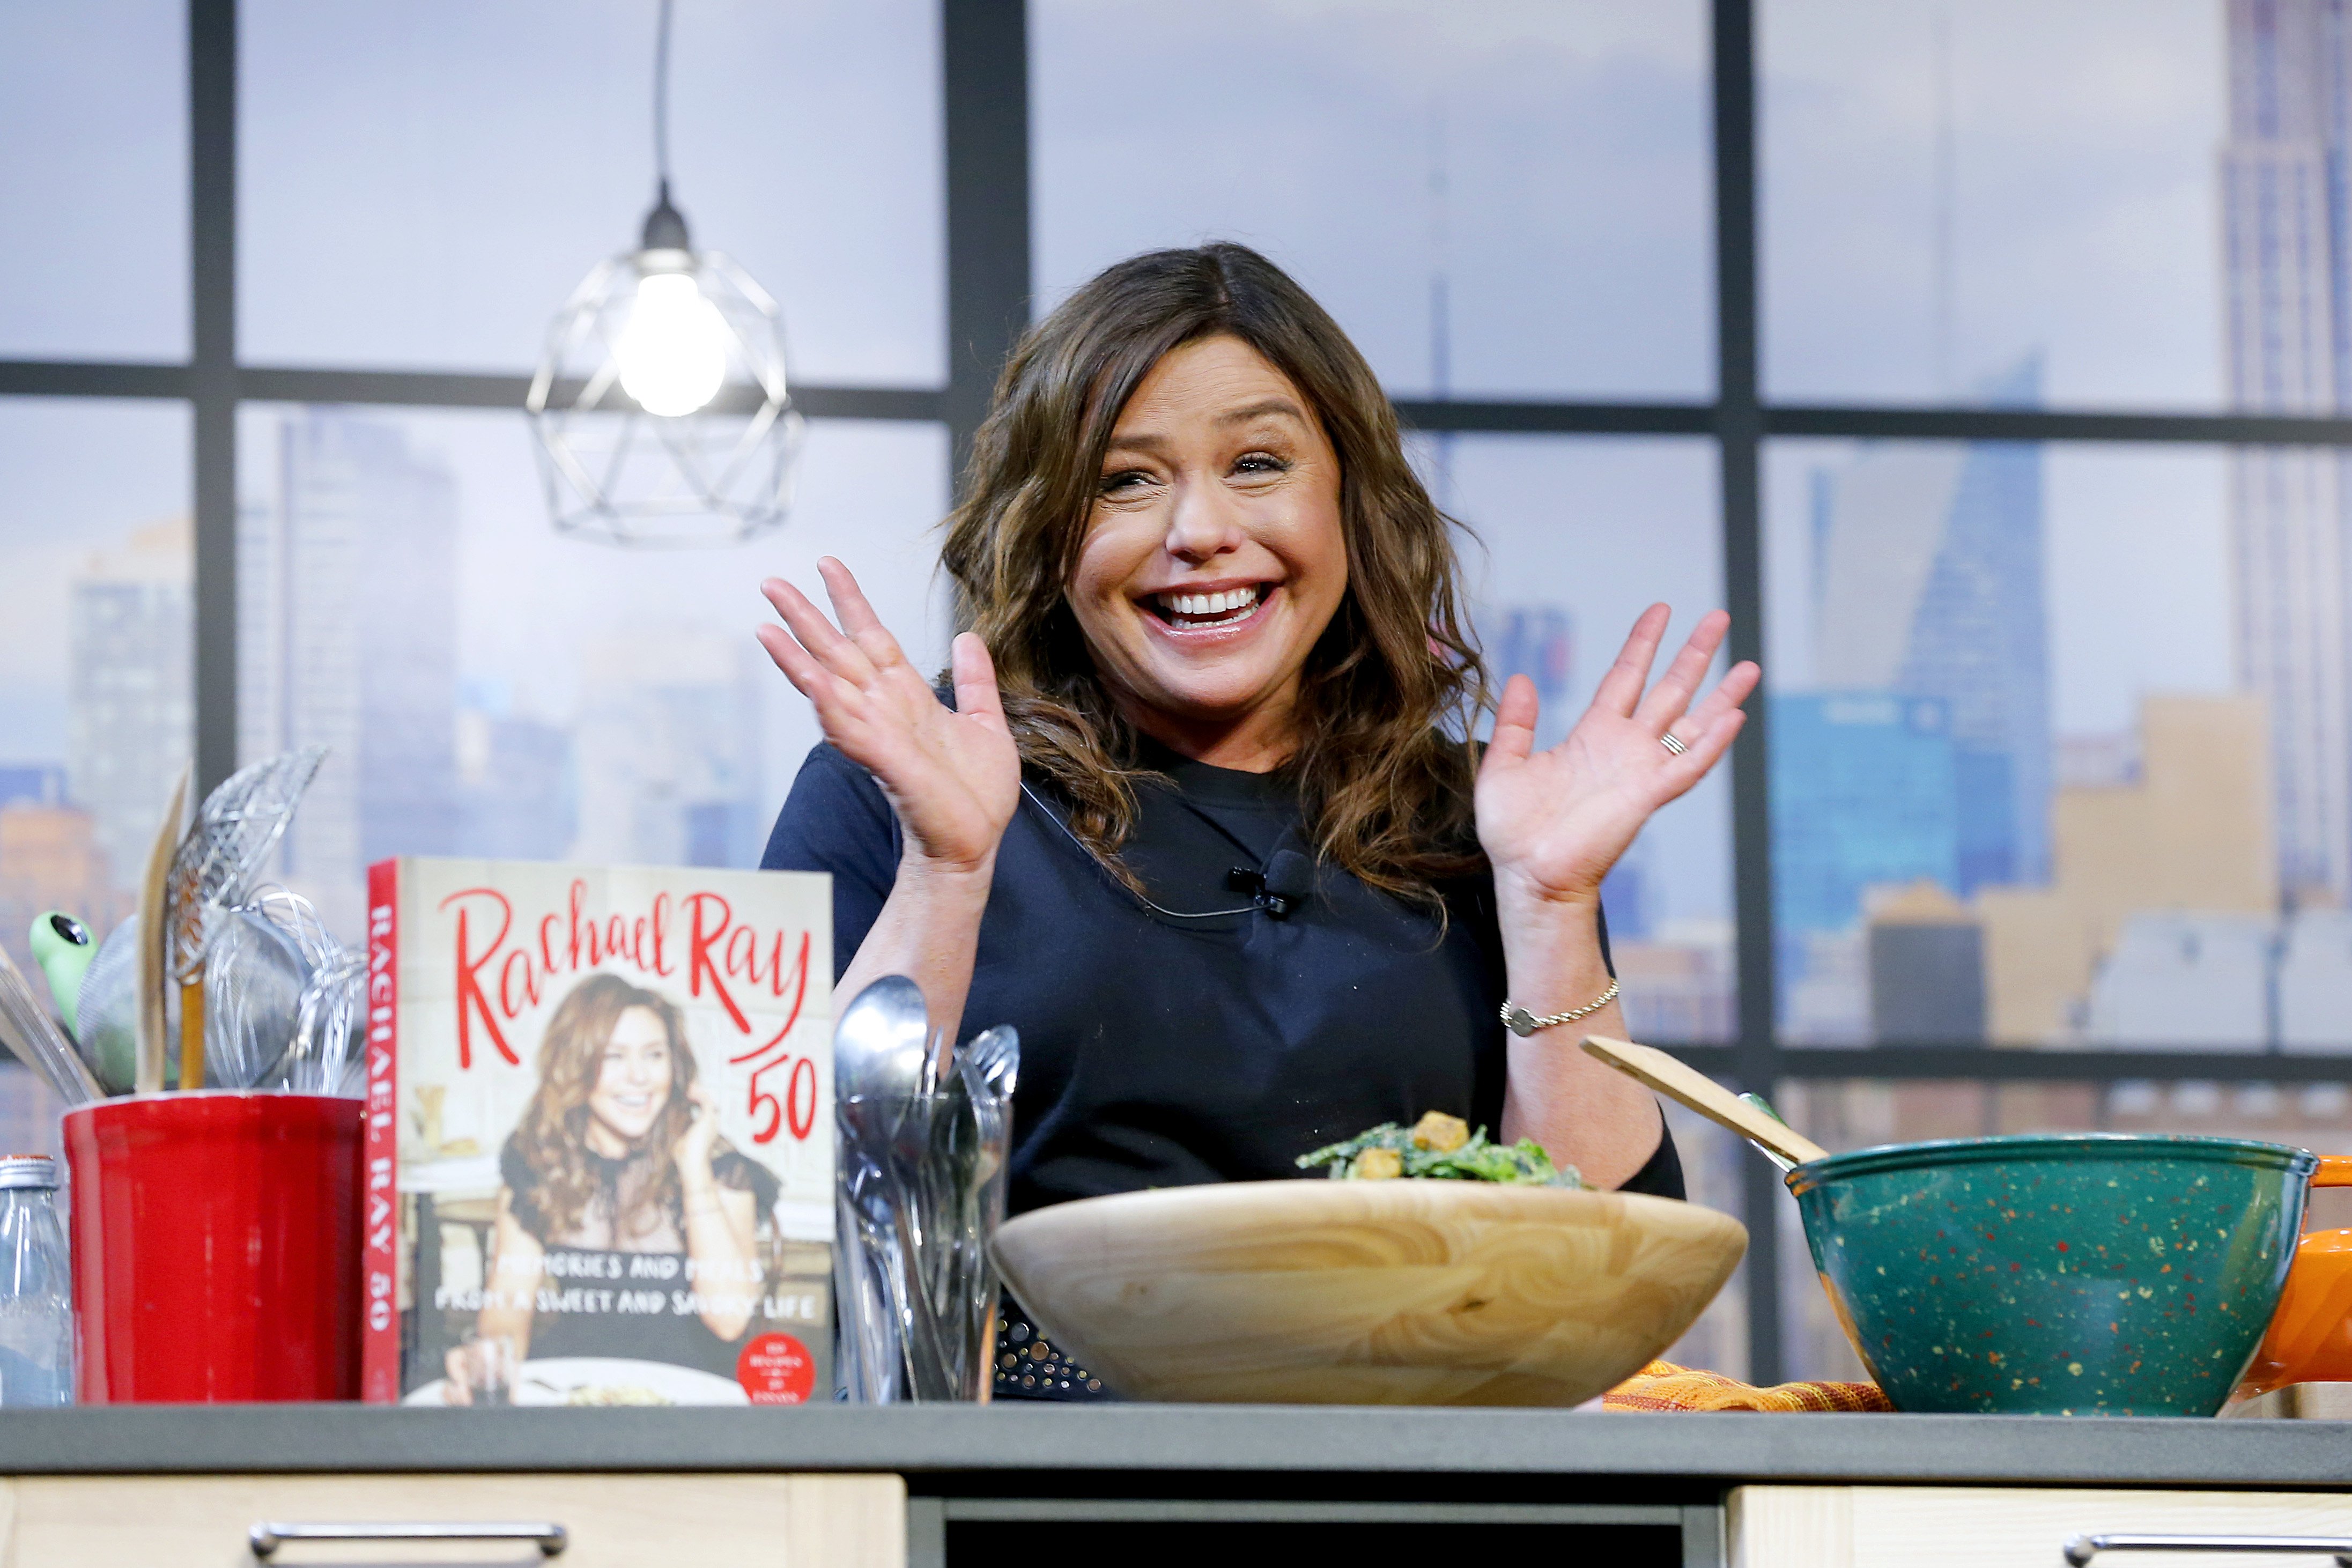 Rachael Ray onstage during a culinary demonstration at The Grand Tasting in New York City on October 12, 2019. | Source: John Lamparski/Getty Images